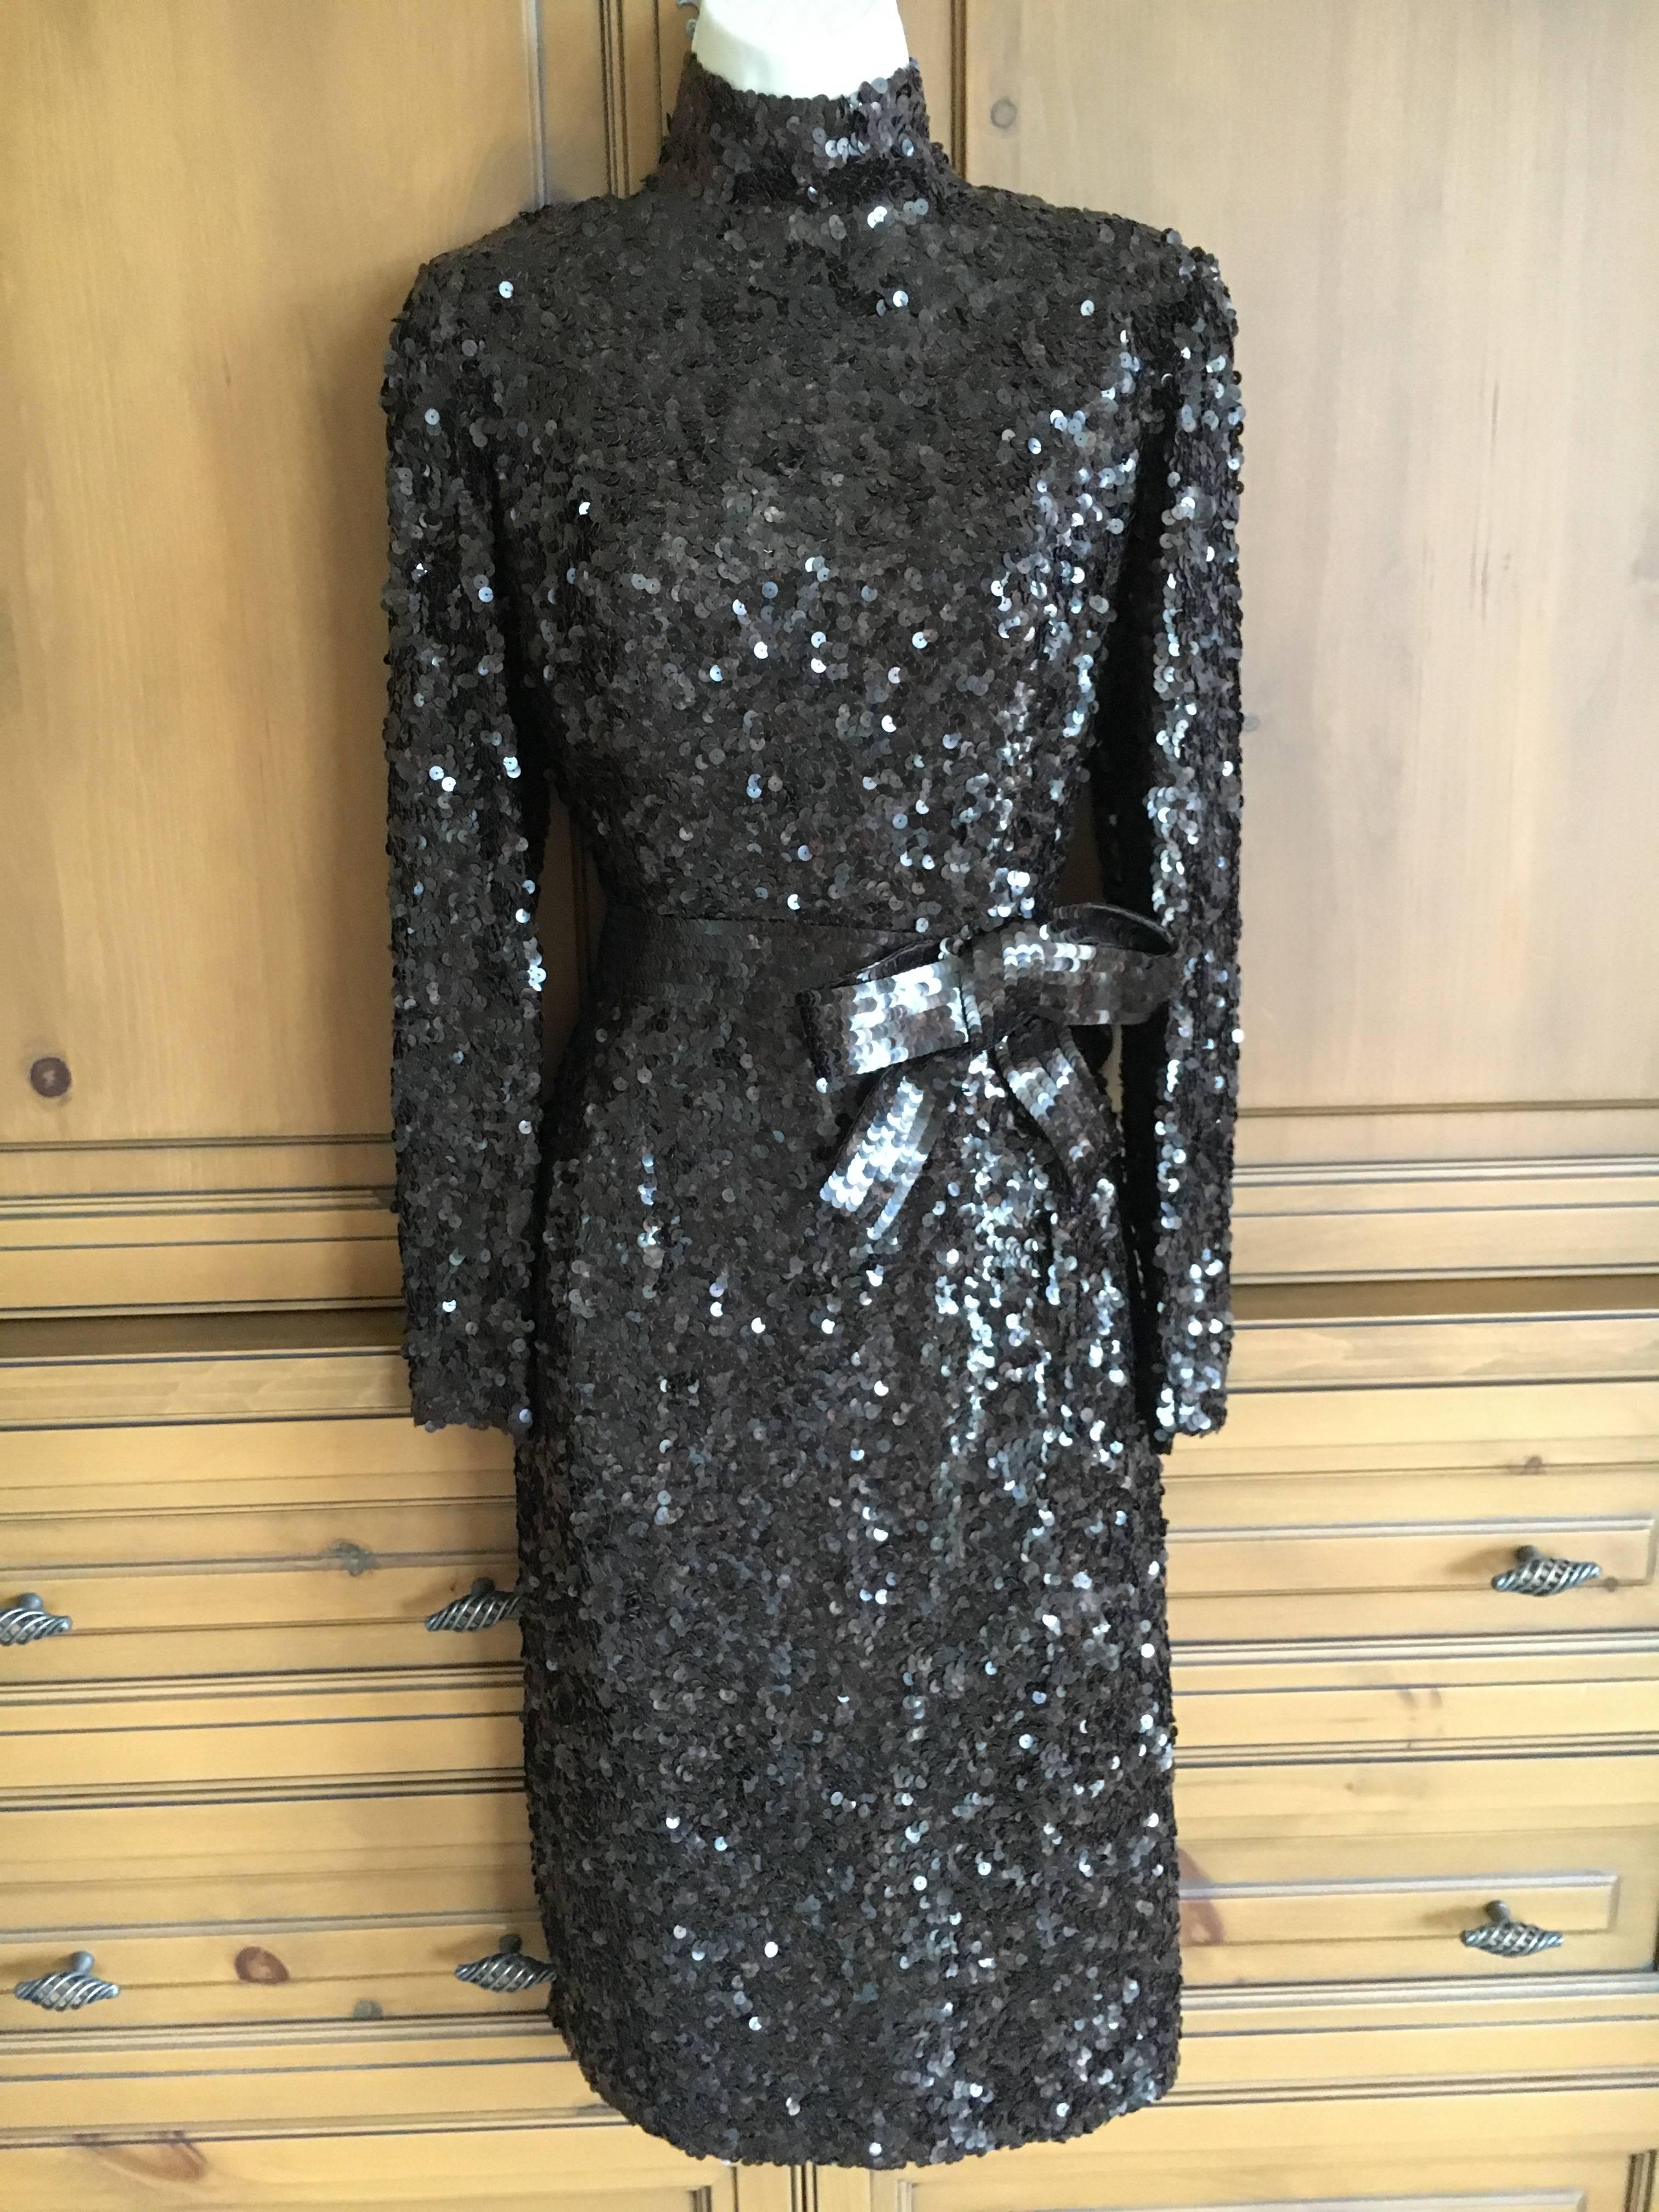 Norman Norell 1960's Sequin Cocktail Dress with Attached Bow Belt In Excellent Condition For Sale In Cloverdale, CA